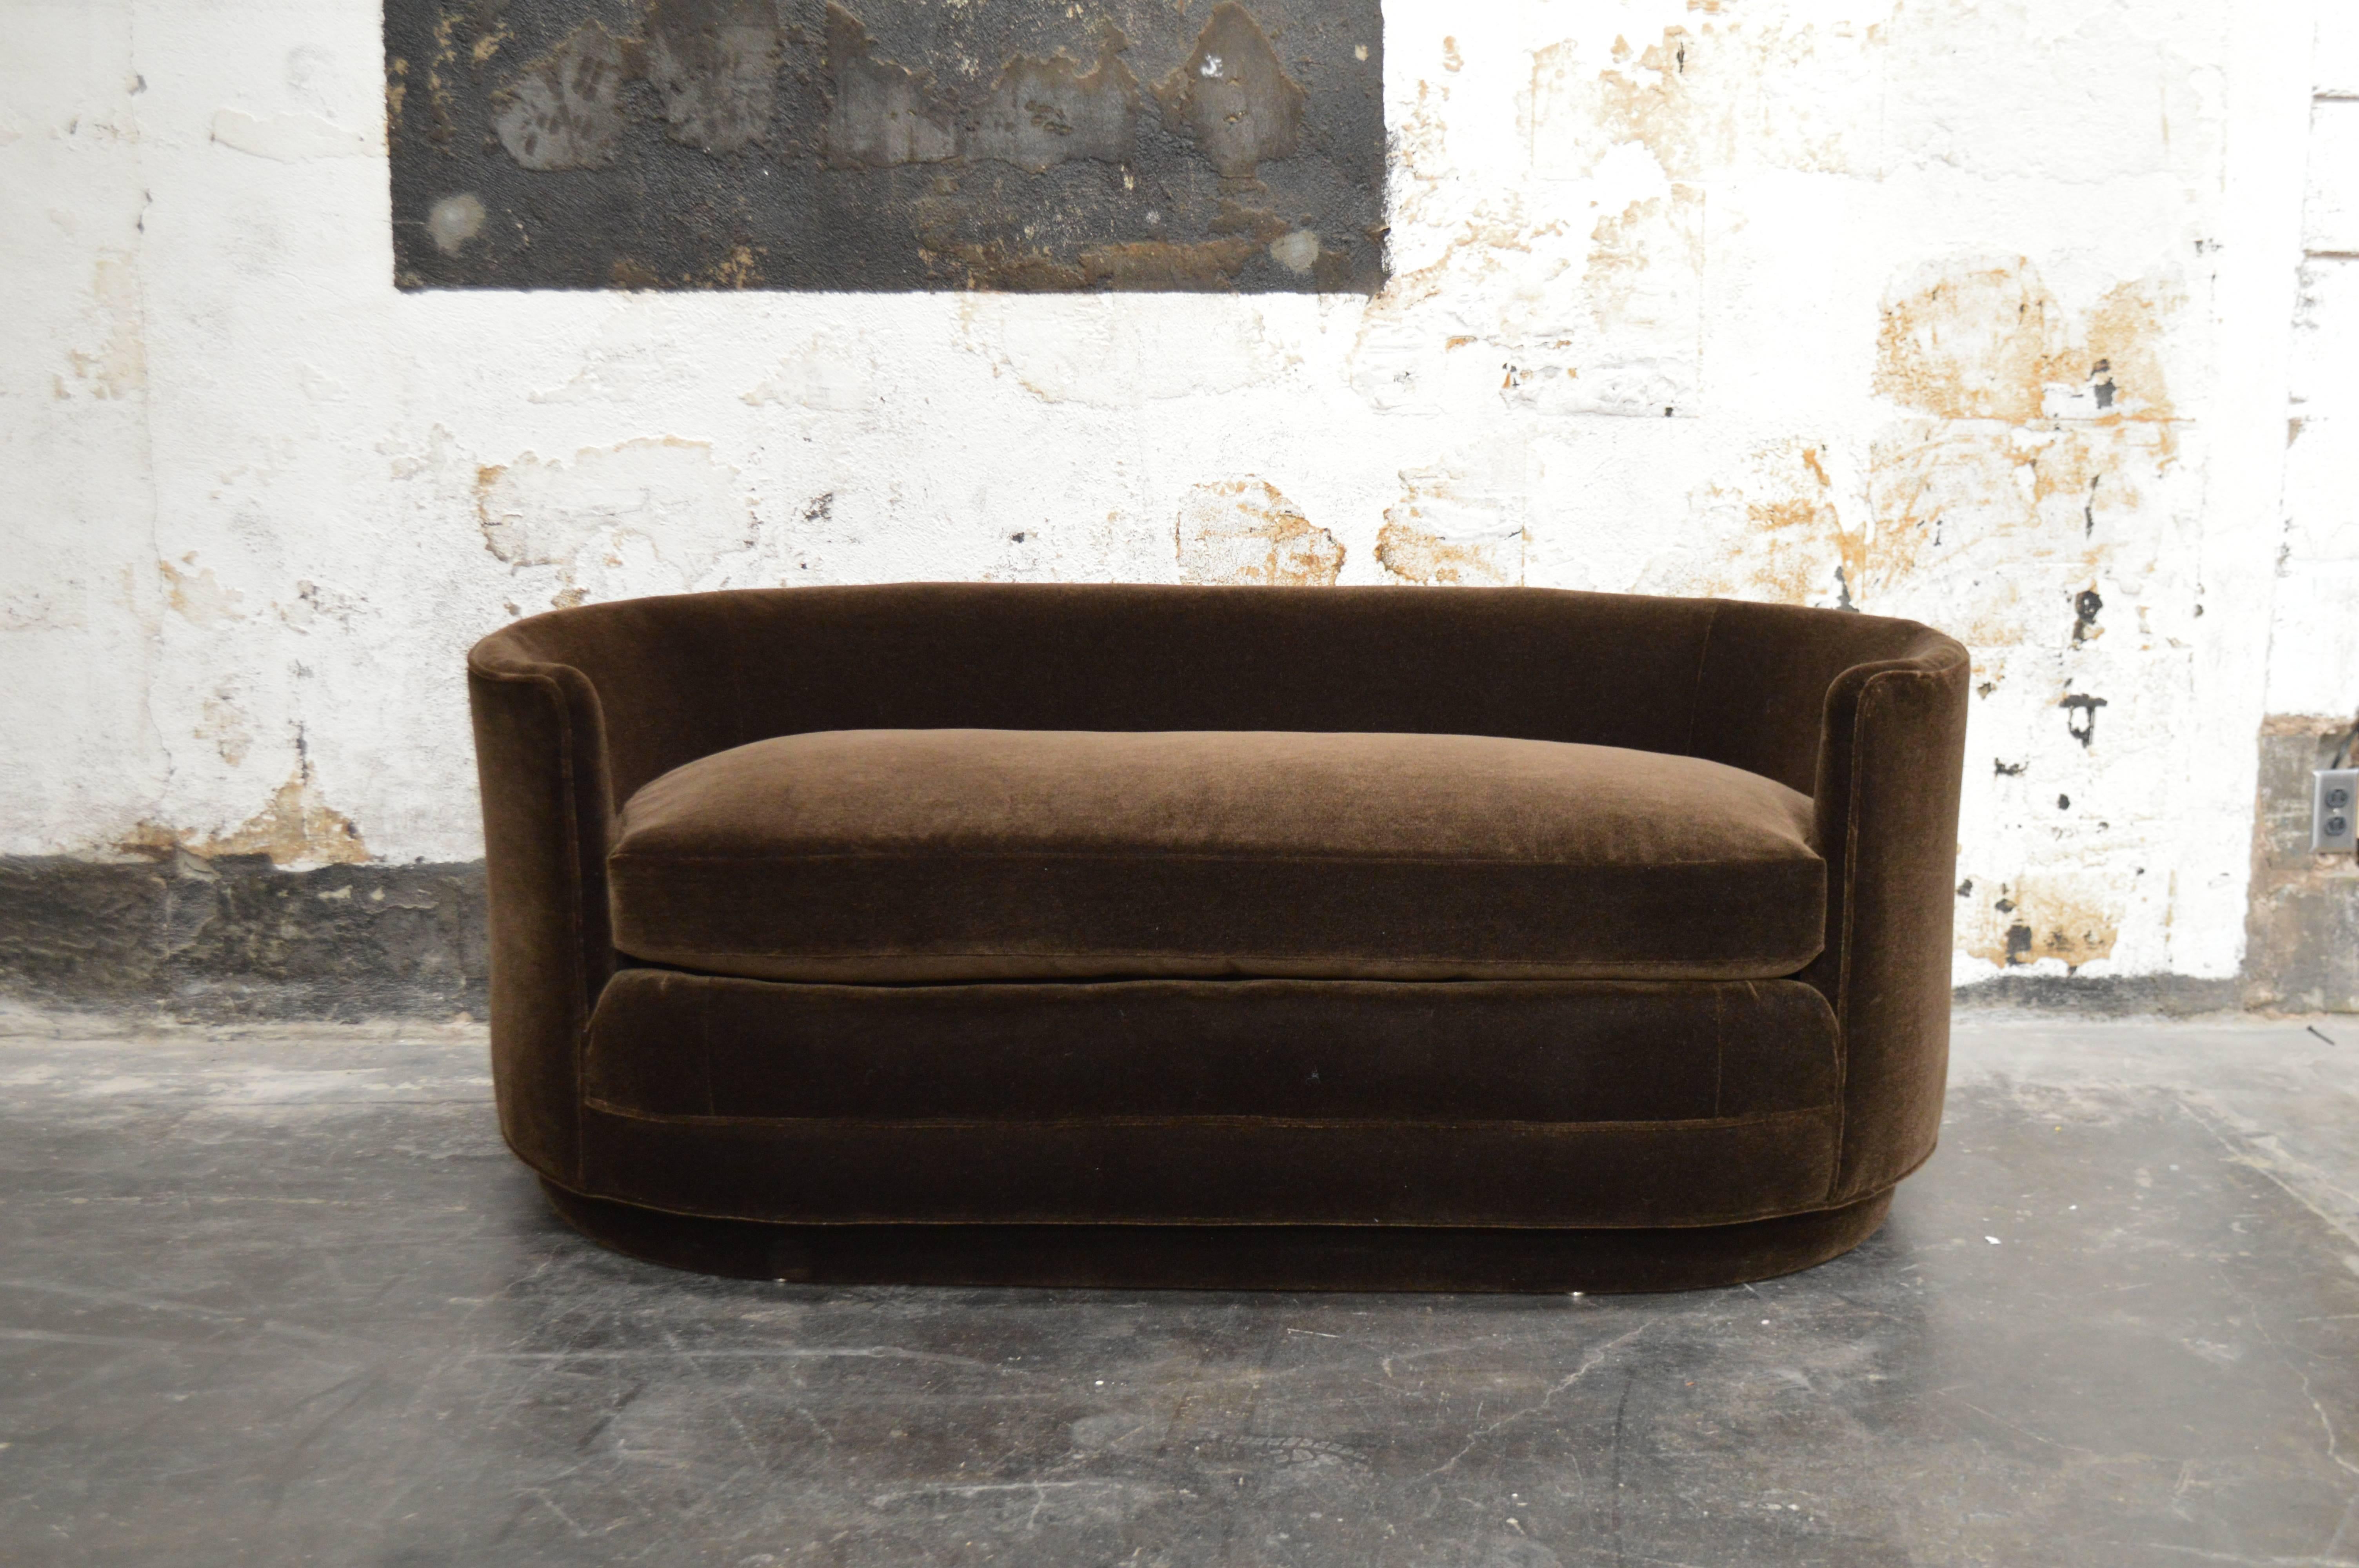 Art Deco Pair of Vintage Curved Loveseat Sofas in Chocolate Brown Mohair